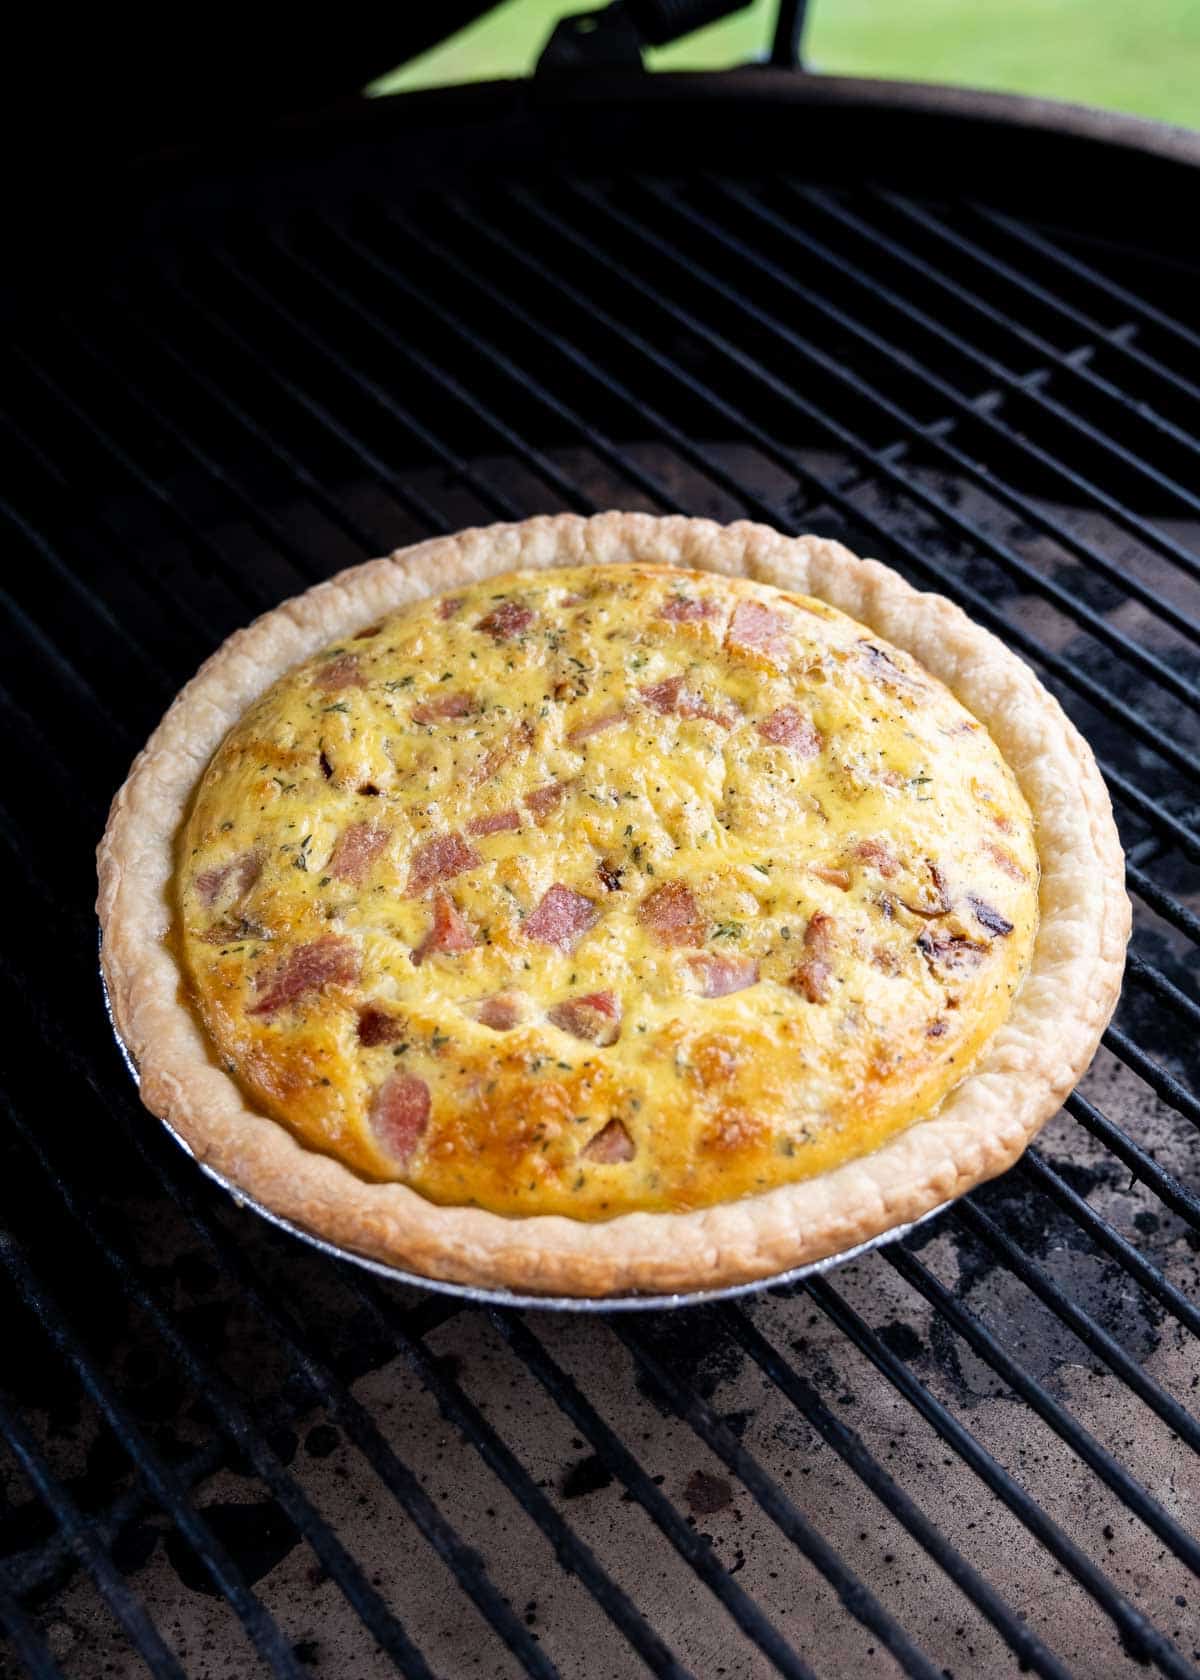 A grilled quiche almost done on a Big Green Egg grill.